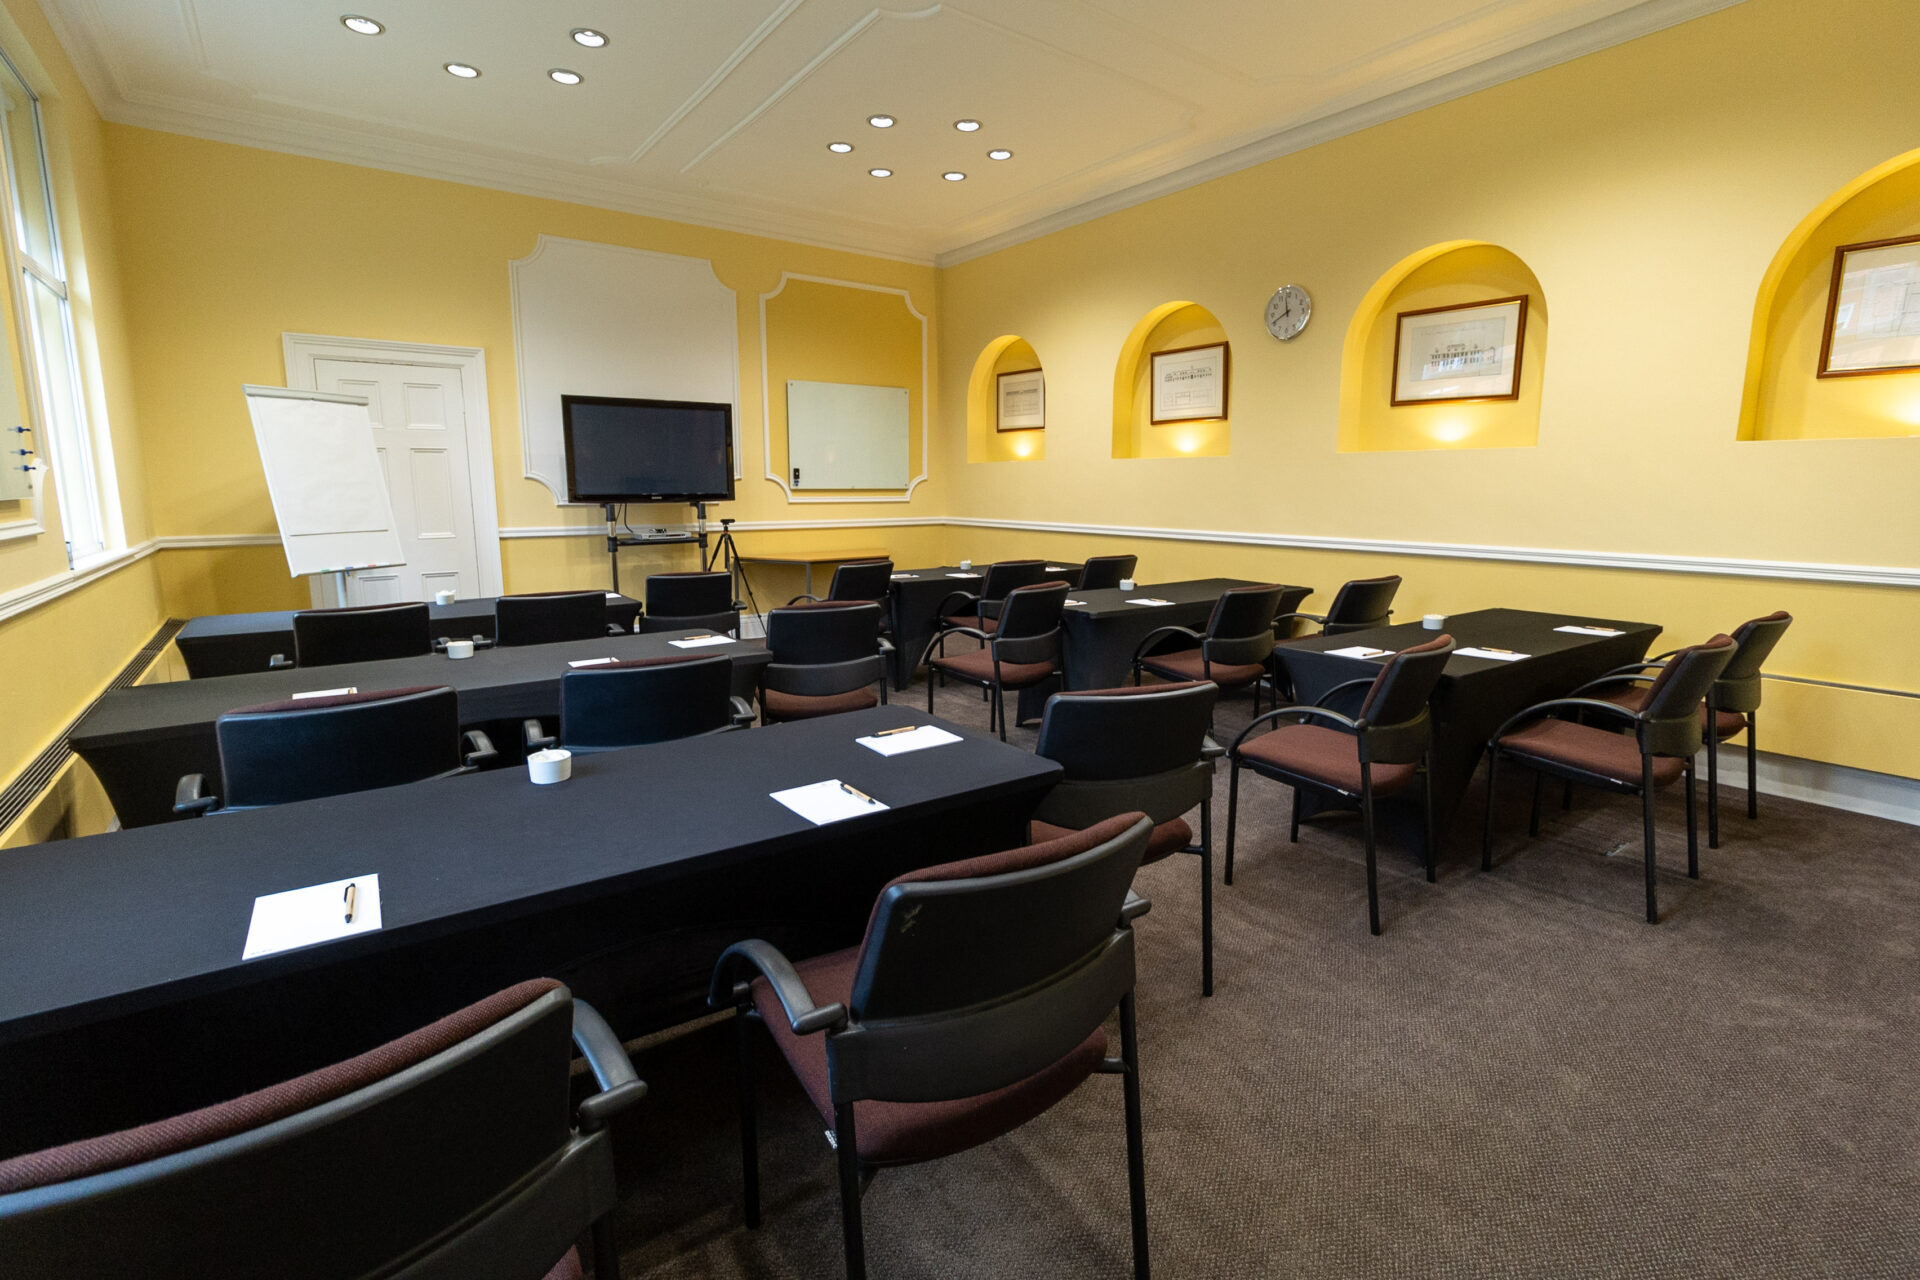 The Hodgson conference room, laid out as a classroom to accommodate up to 18 people.